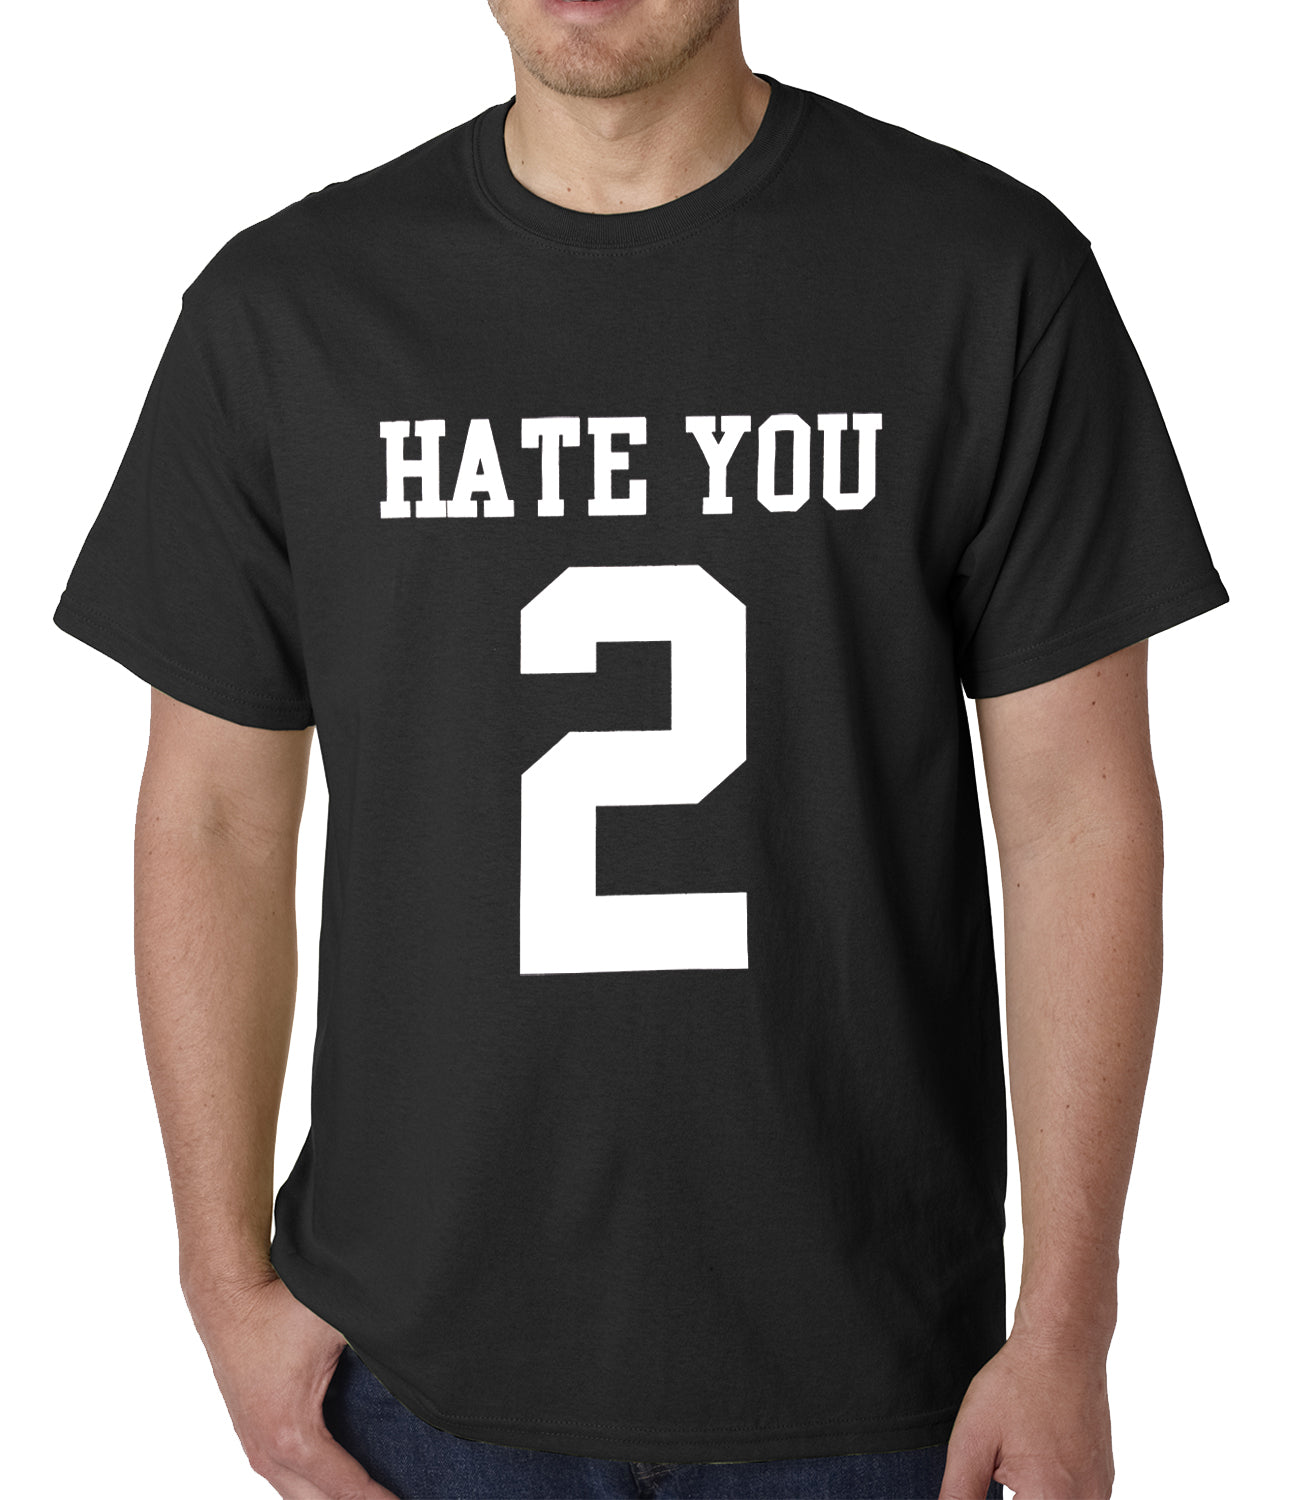 Hate You 2 Mens T-shirt